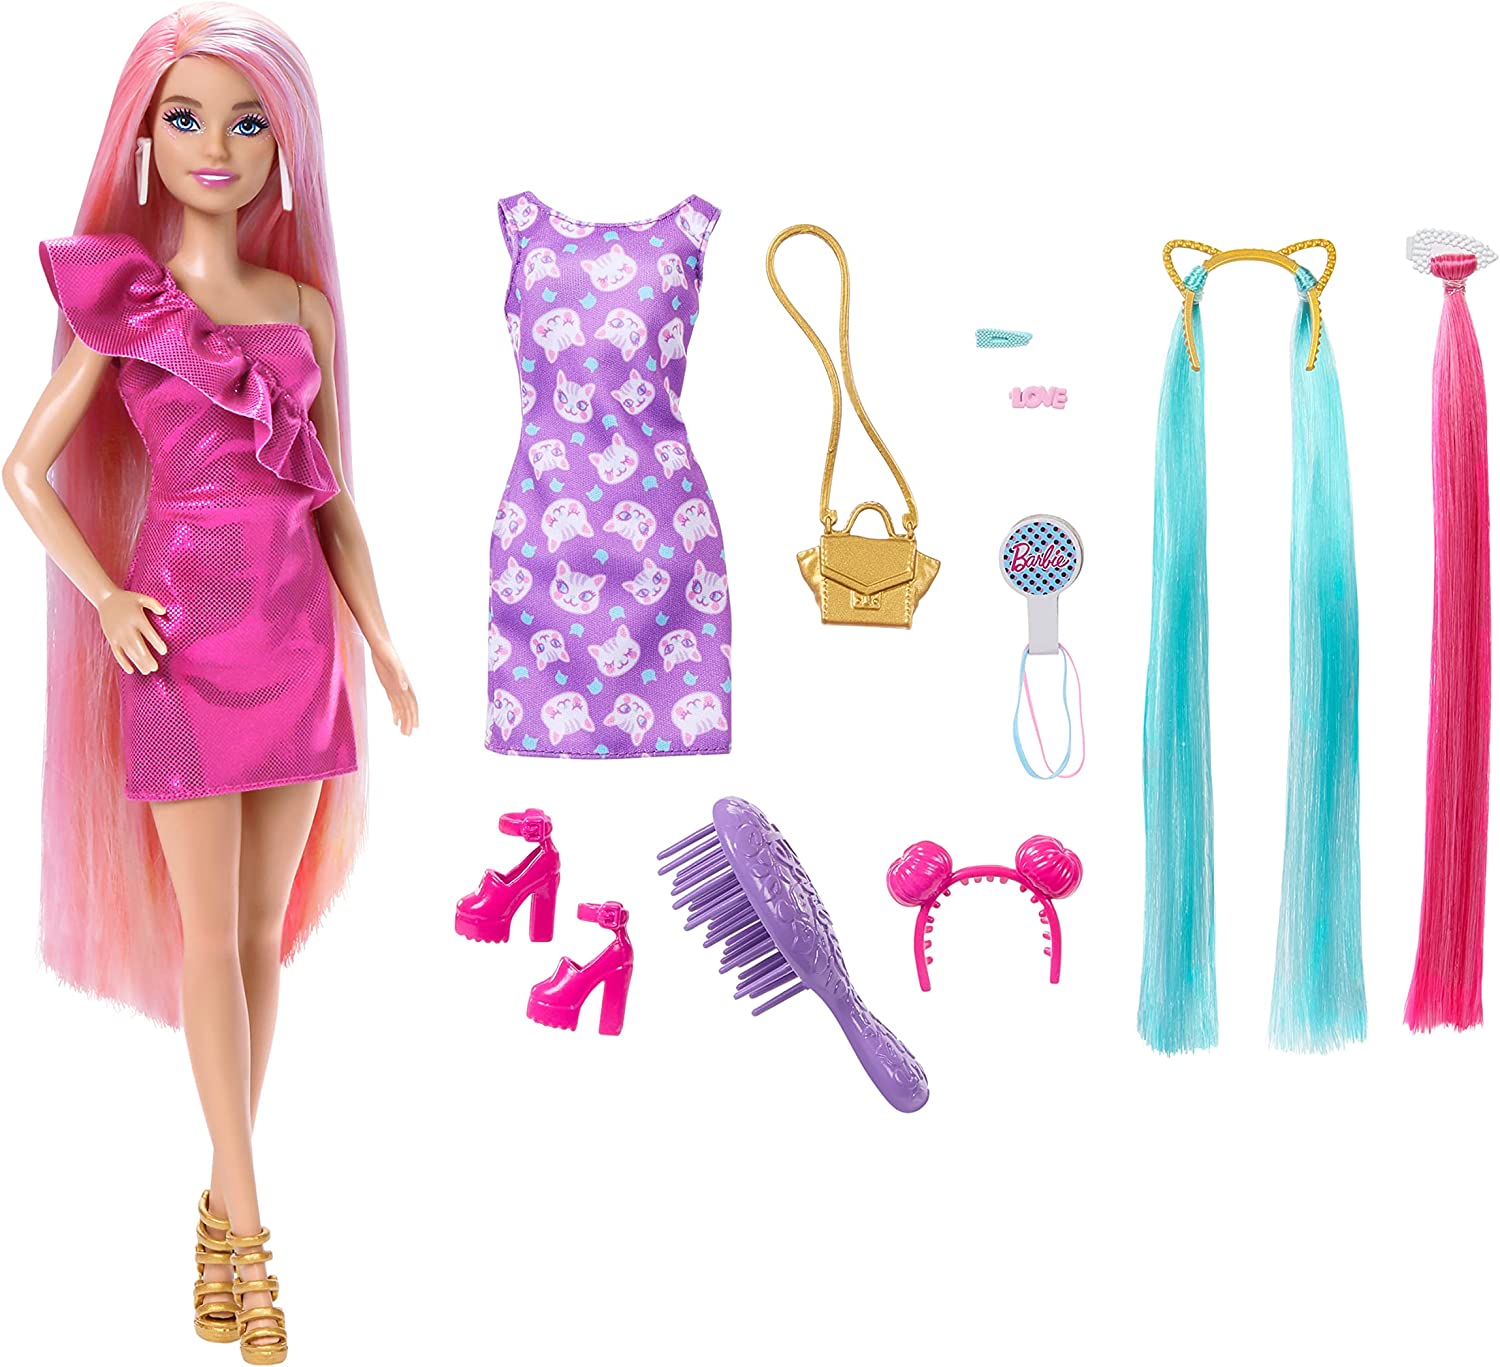 25 Best Barbie Toys to Buy in 2023  Barbie Dolls for Kids